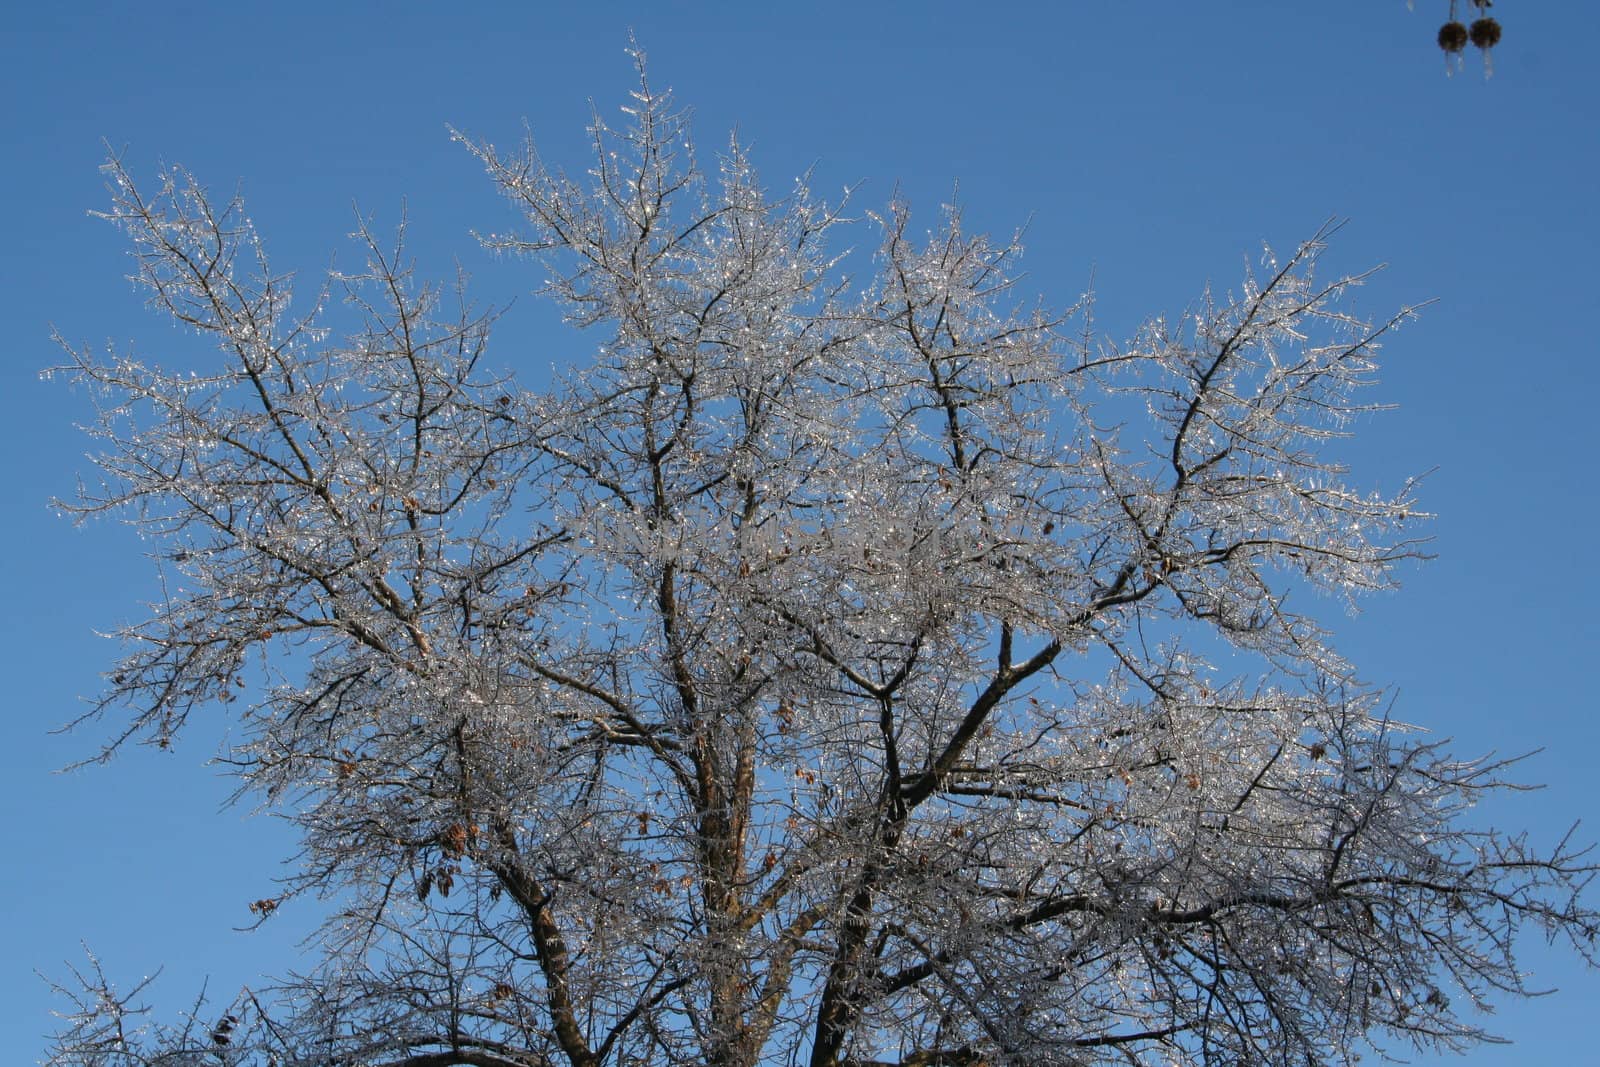 Ice on tree after an ice storm